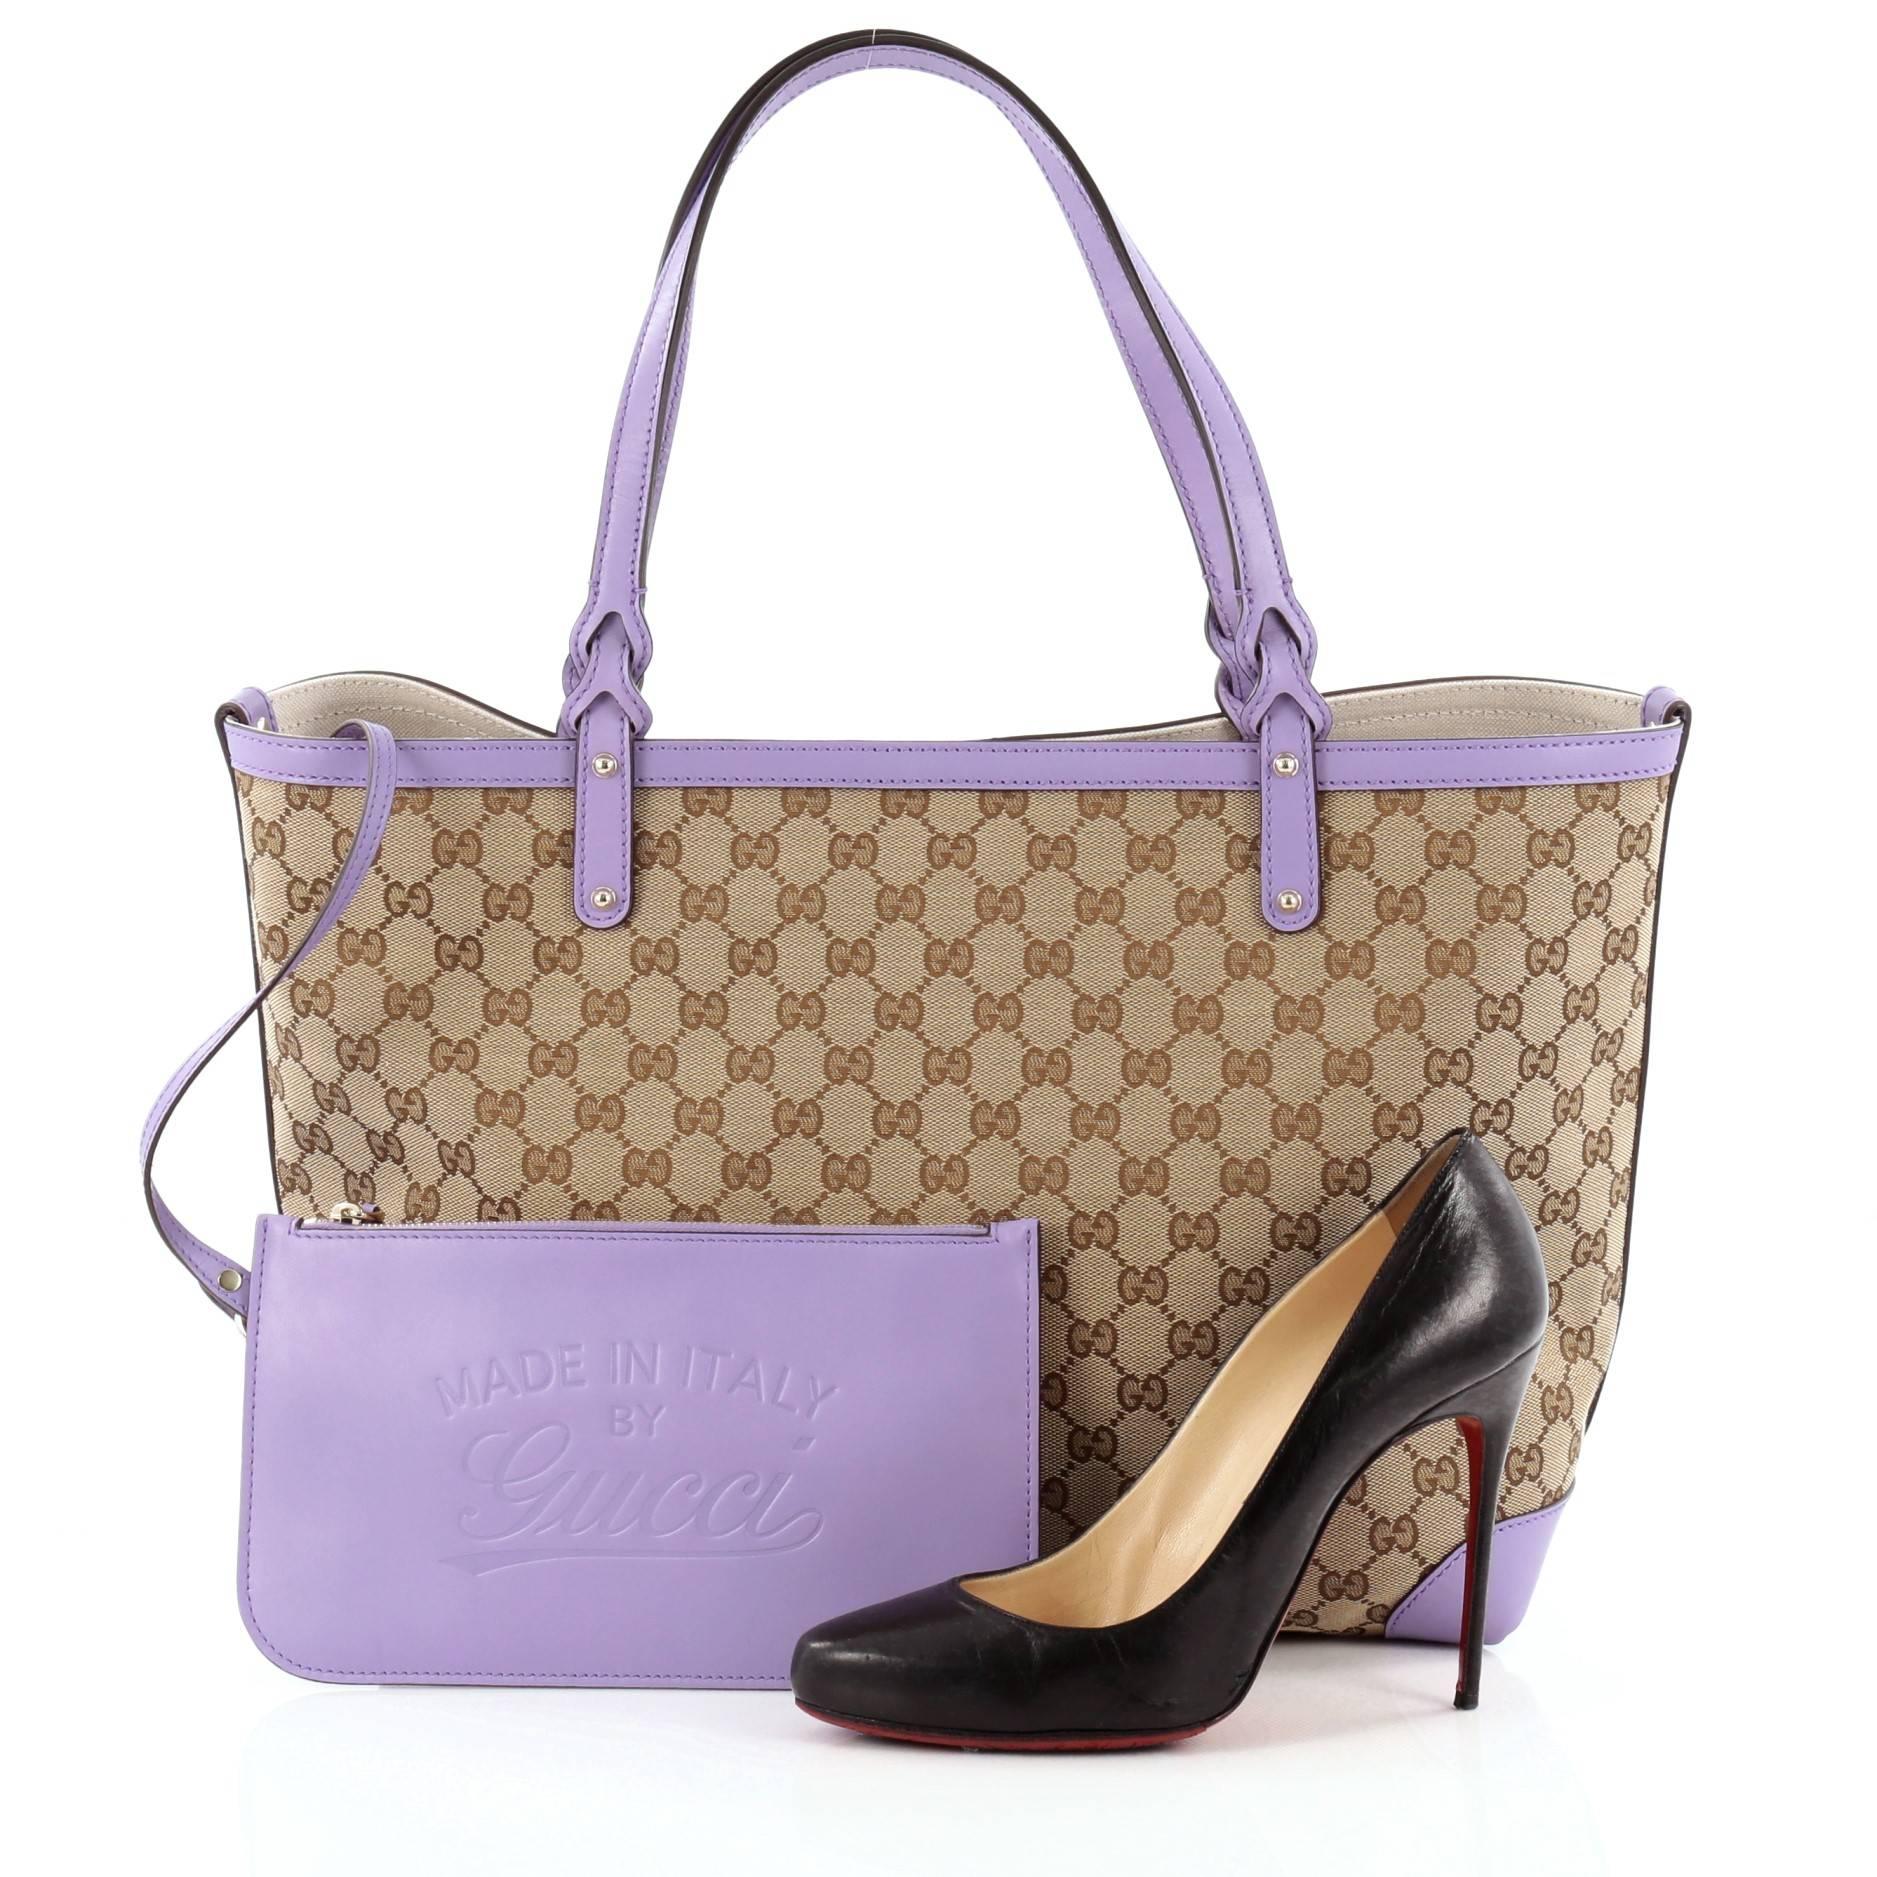 This authentic Gucci Craft Tote GG Canvas Medium is a chic tote ideal for everyday wear. Crafted from brown GG monogram canvas with purple leather trims, this roomy tote features dual-flat handles with braided ends, and light gold-tone hardware